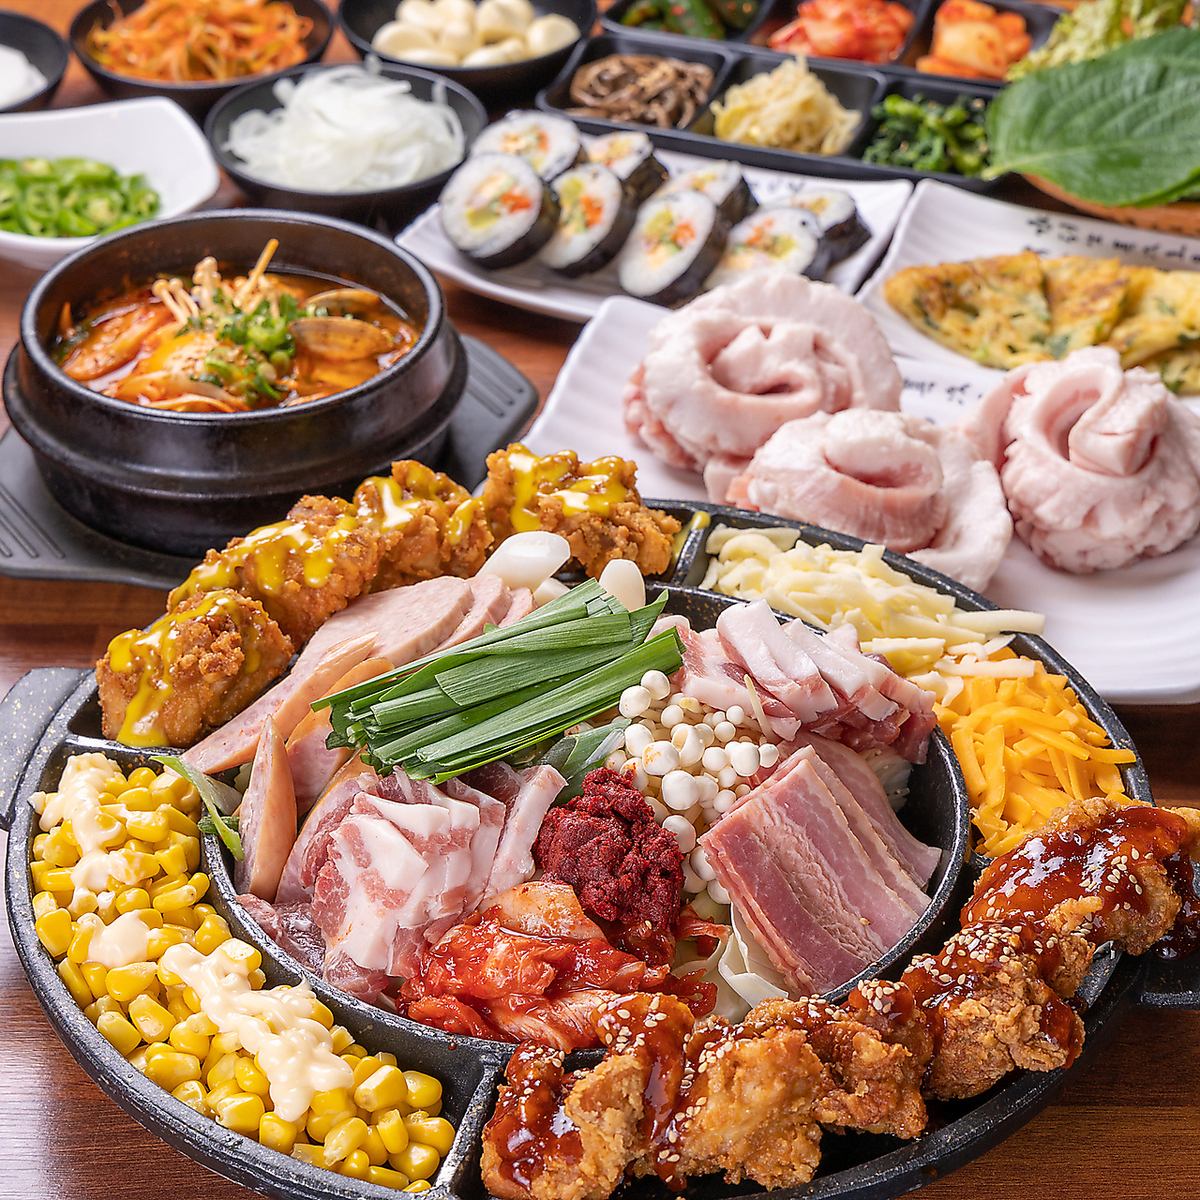 All-you-can-eat plan including samgyeopsal and UFO fondue starting from 2,980 yen☆